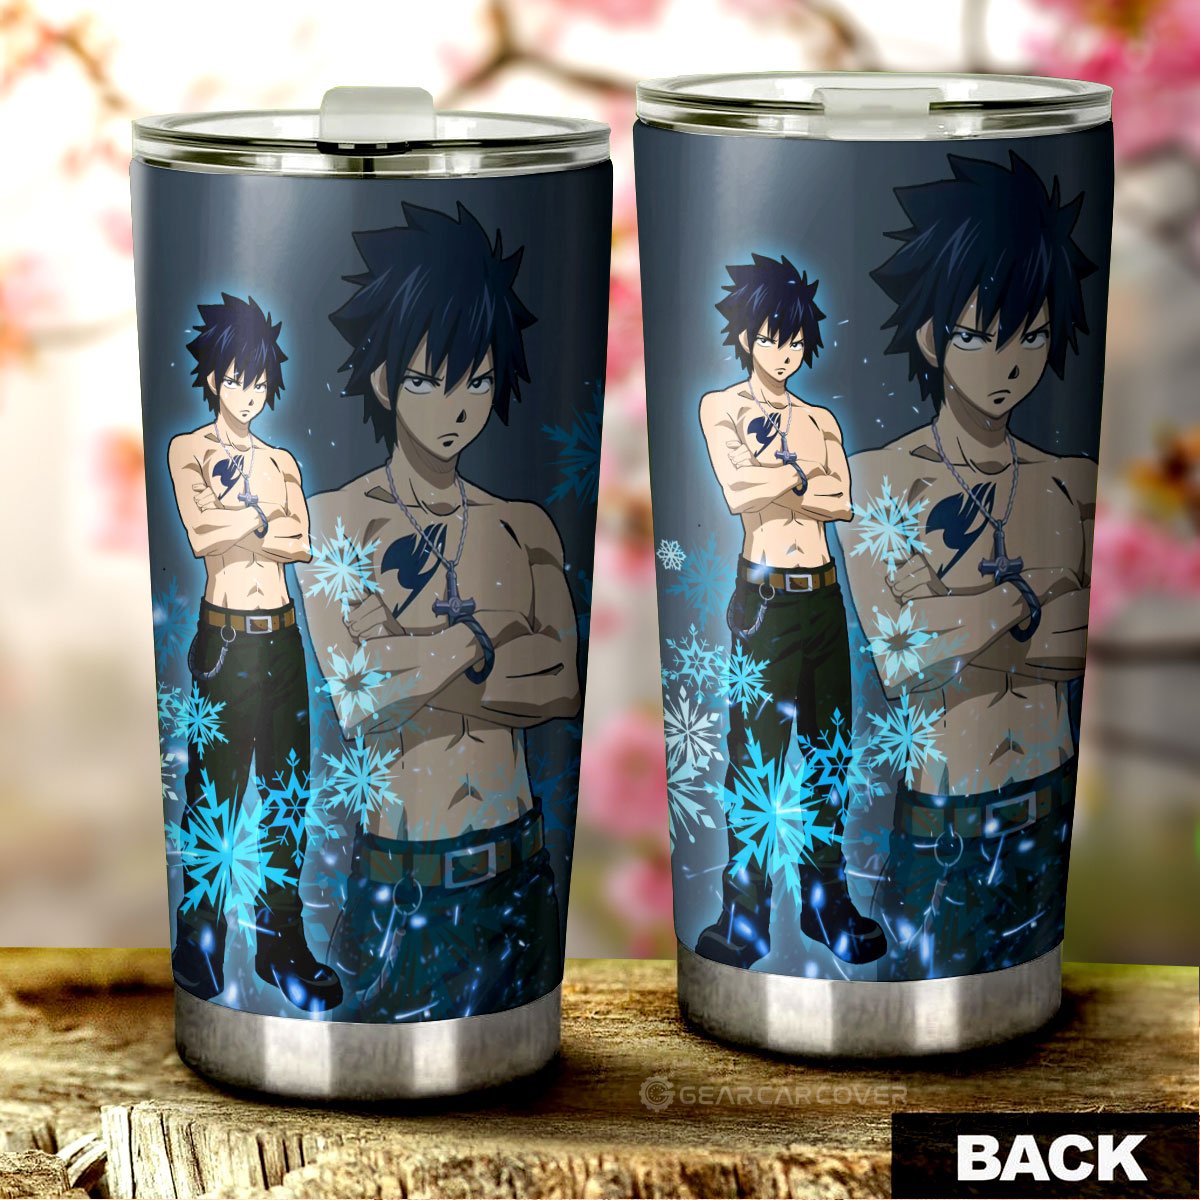 Gray Fullbuster Tumbler Cup Custom Fairy Tail Anime Car Accessories - Gearcarcover - 3